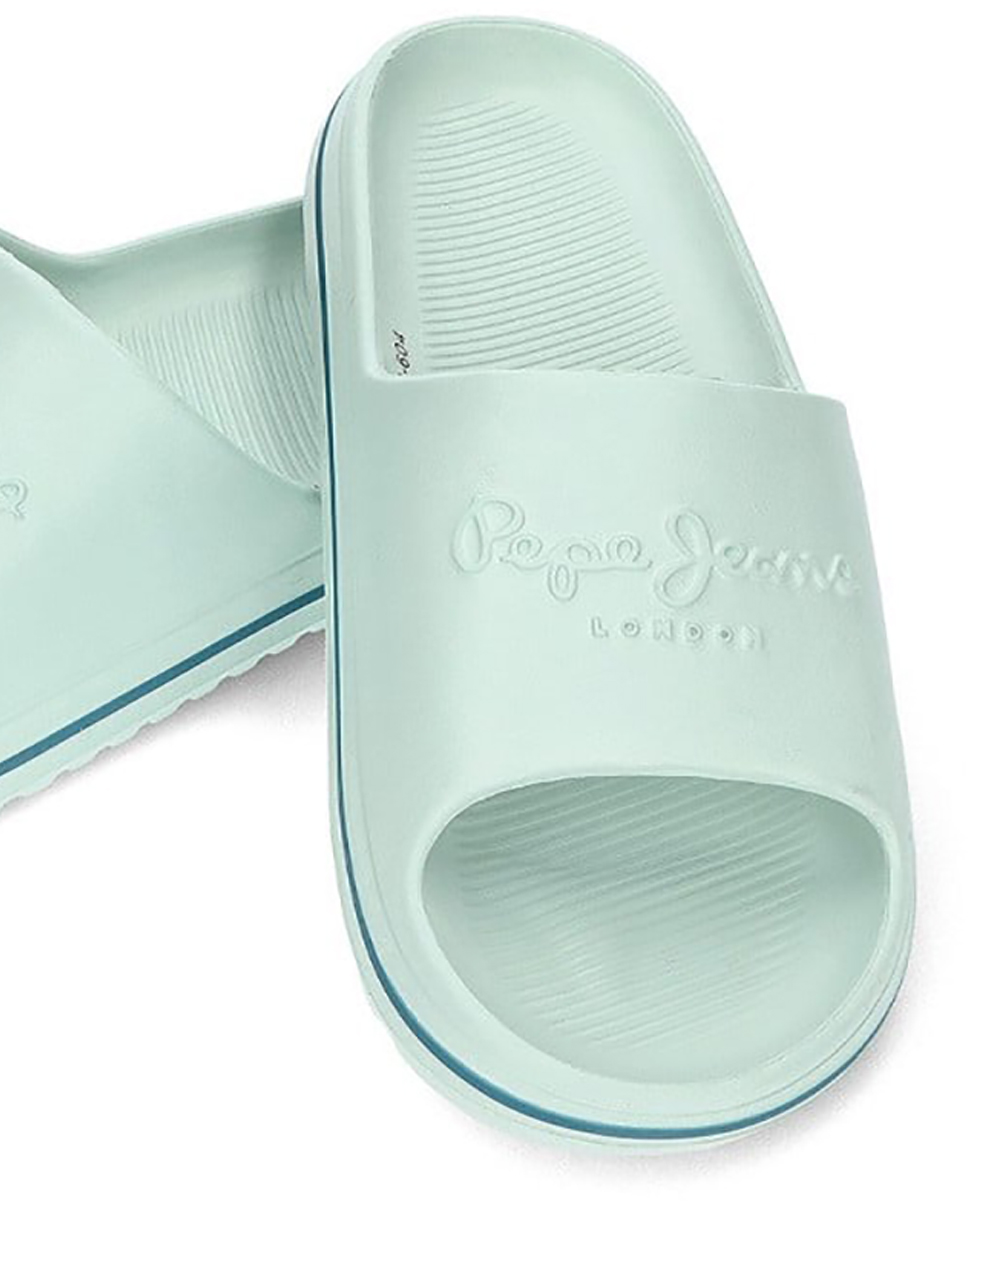 PEPE JEANS SOLD OUT DROP 1 BEACH SLIDE W BEACH ΠΑΠΟΥΤΣΙ ΓΥΝΑΙΚΕΙΟ